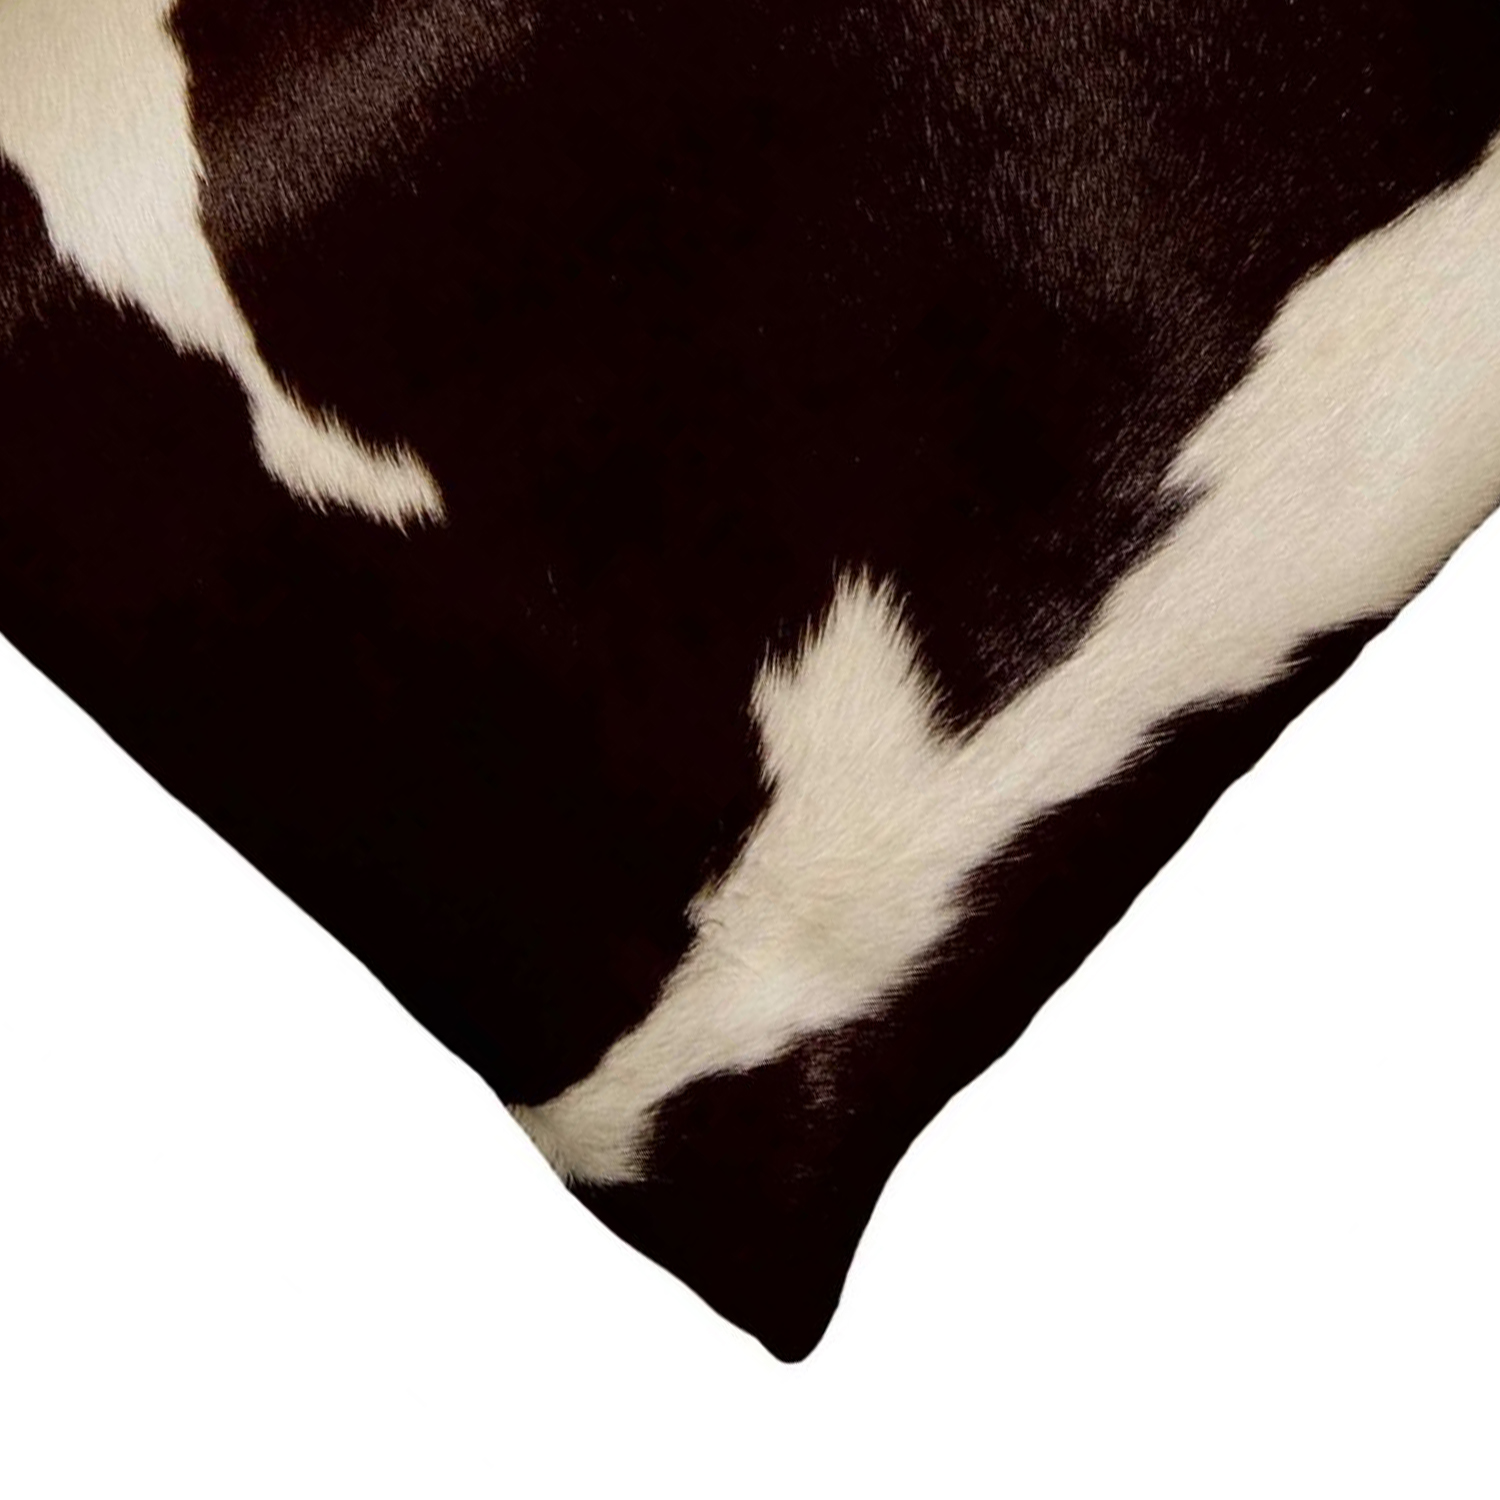 18" x 18" x 5" Chocolate And White Cowhide - Pillow